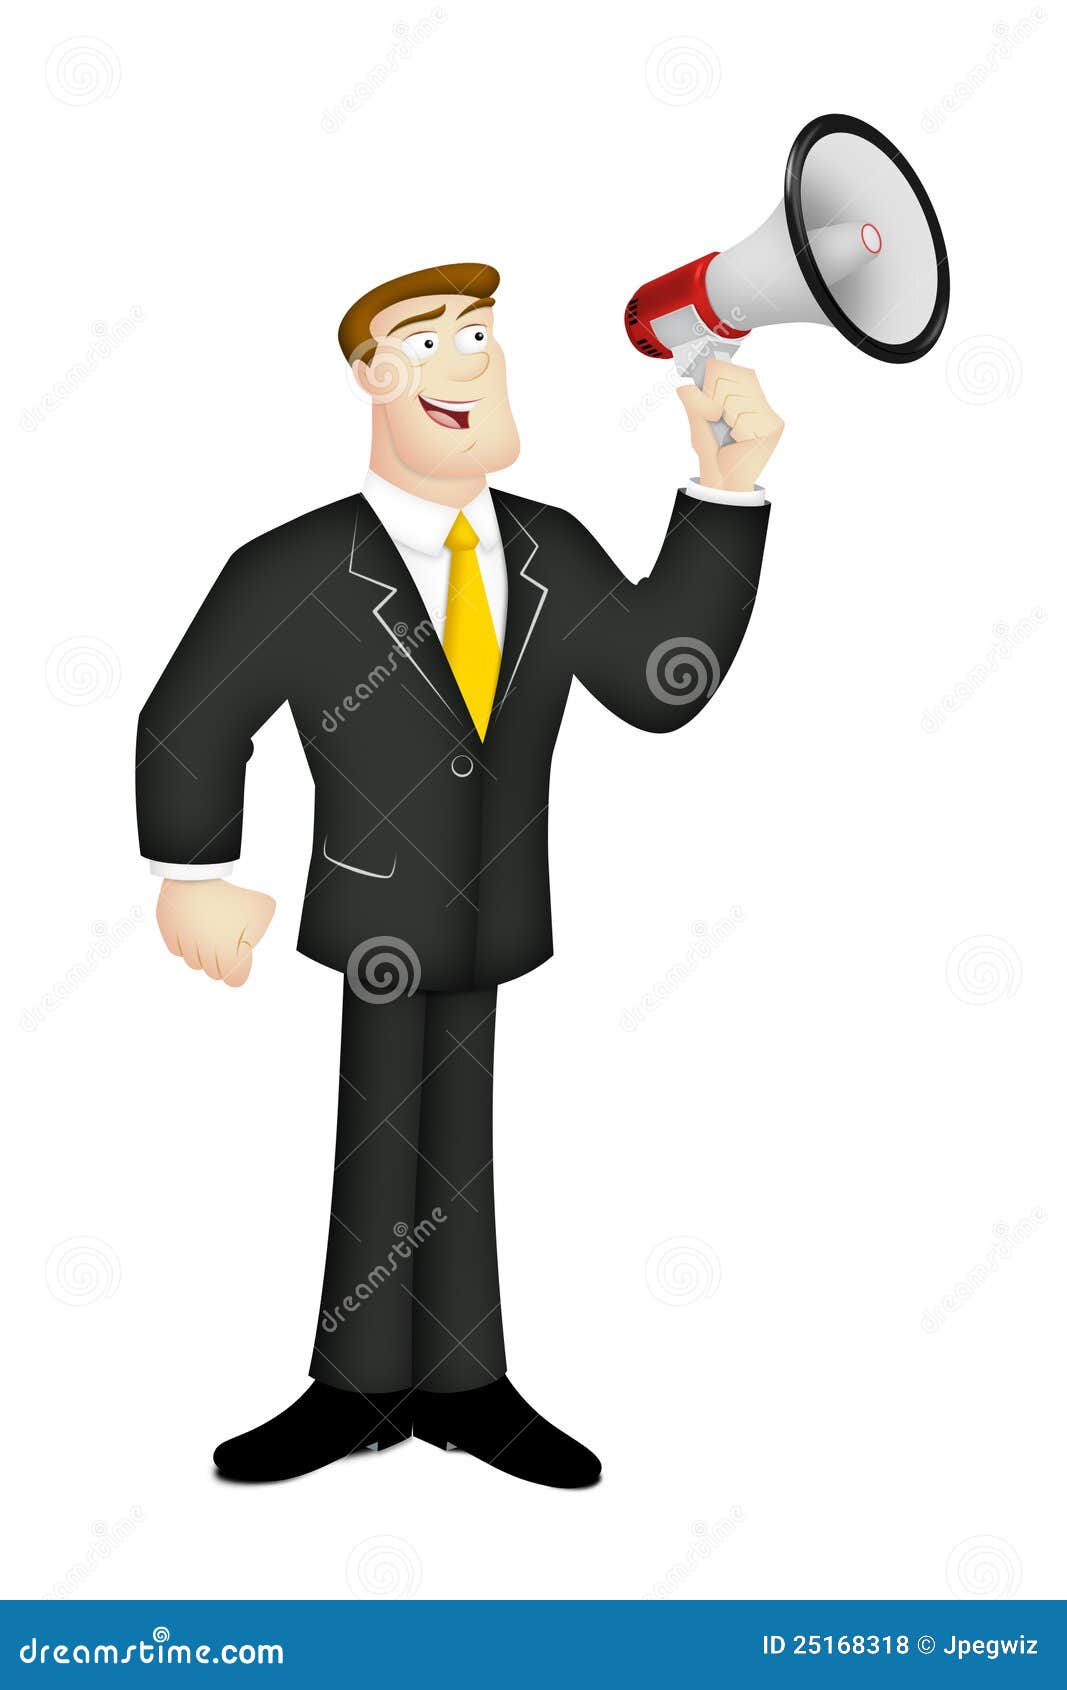 clipart man with megaphone - photo #30